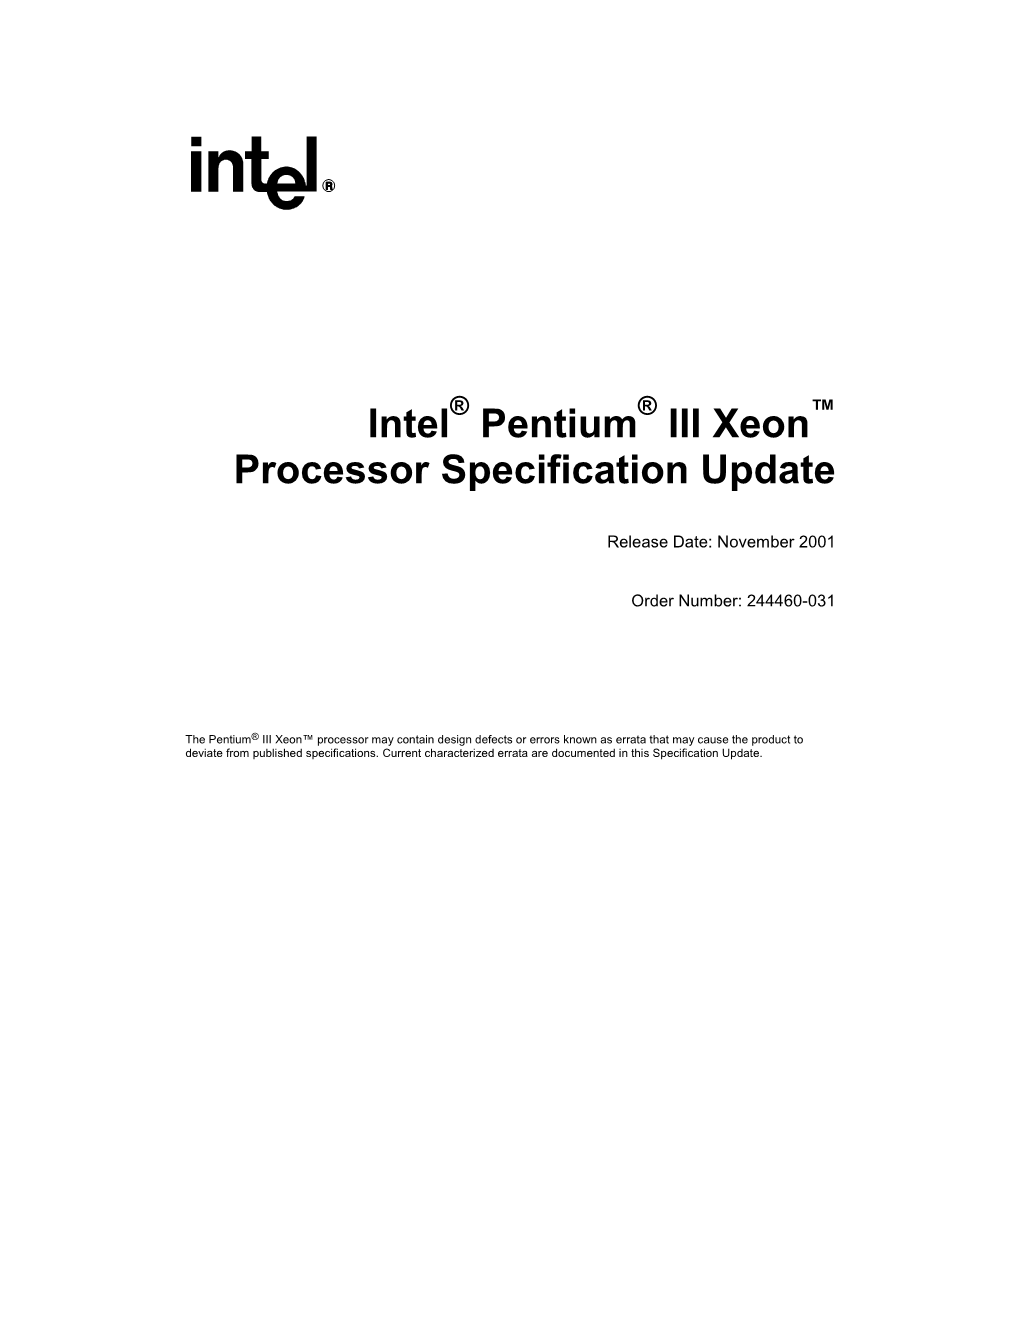 Specification Update for the Pentium® III Xeon™ Processor GENERAL INFORMATION